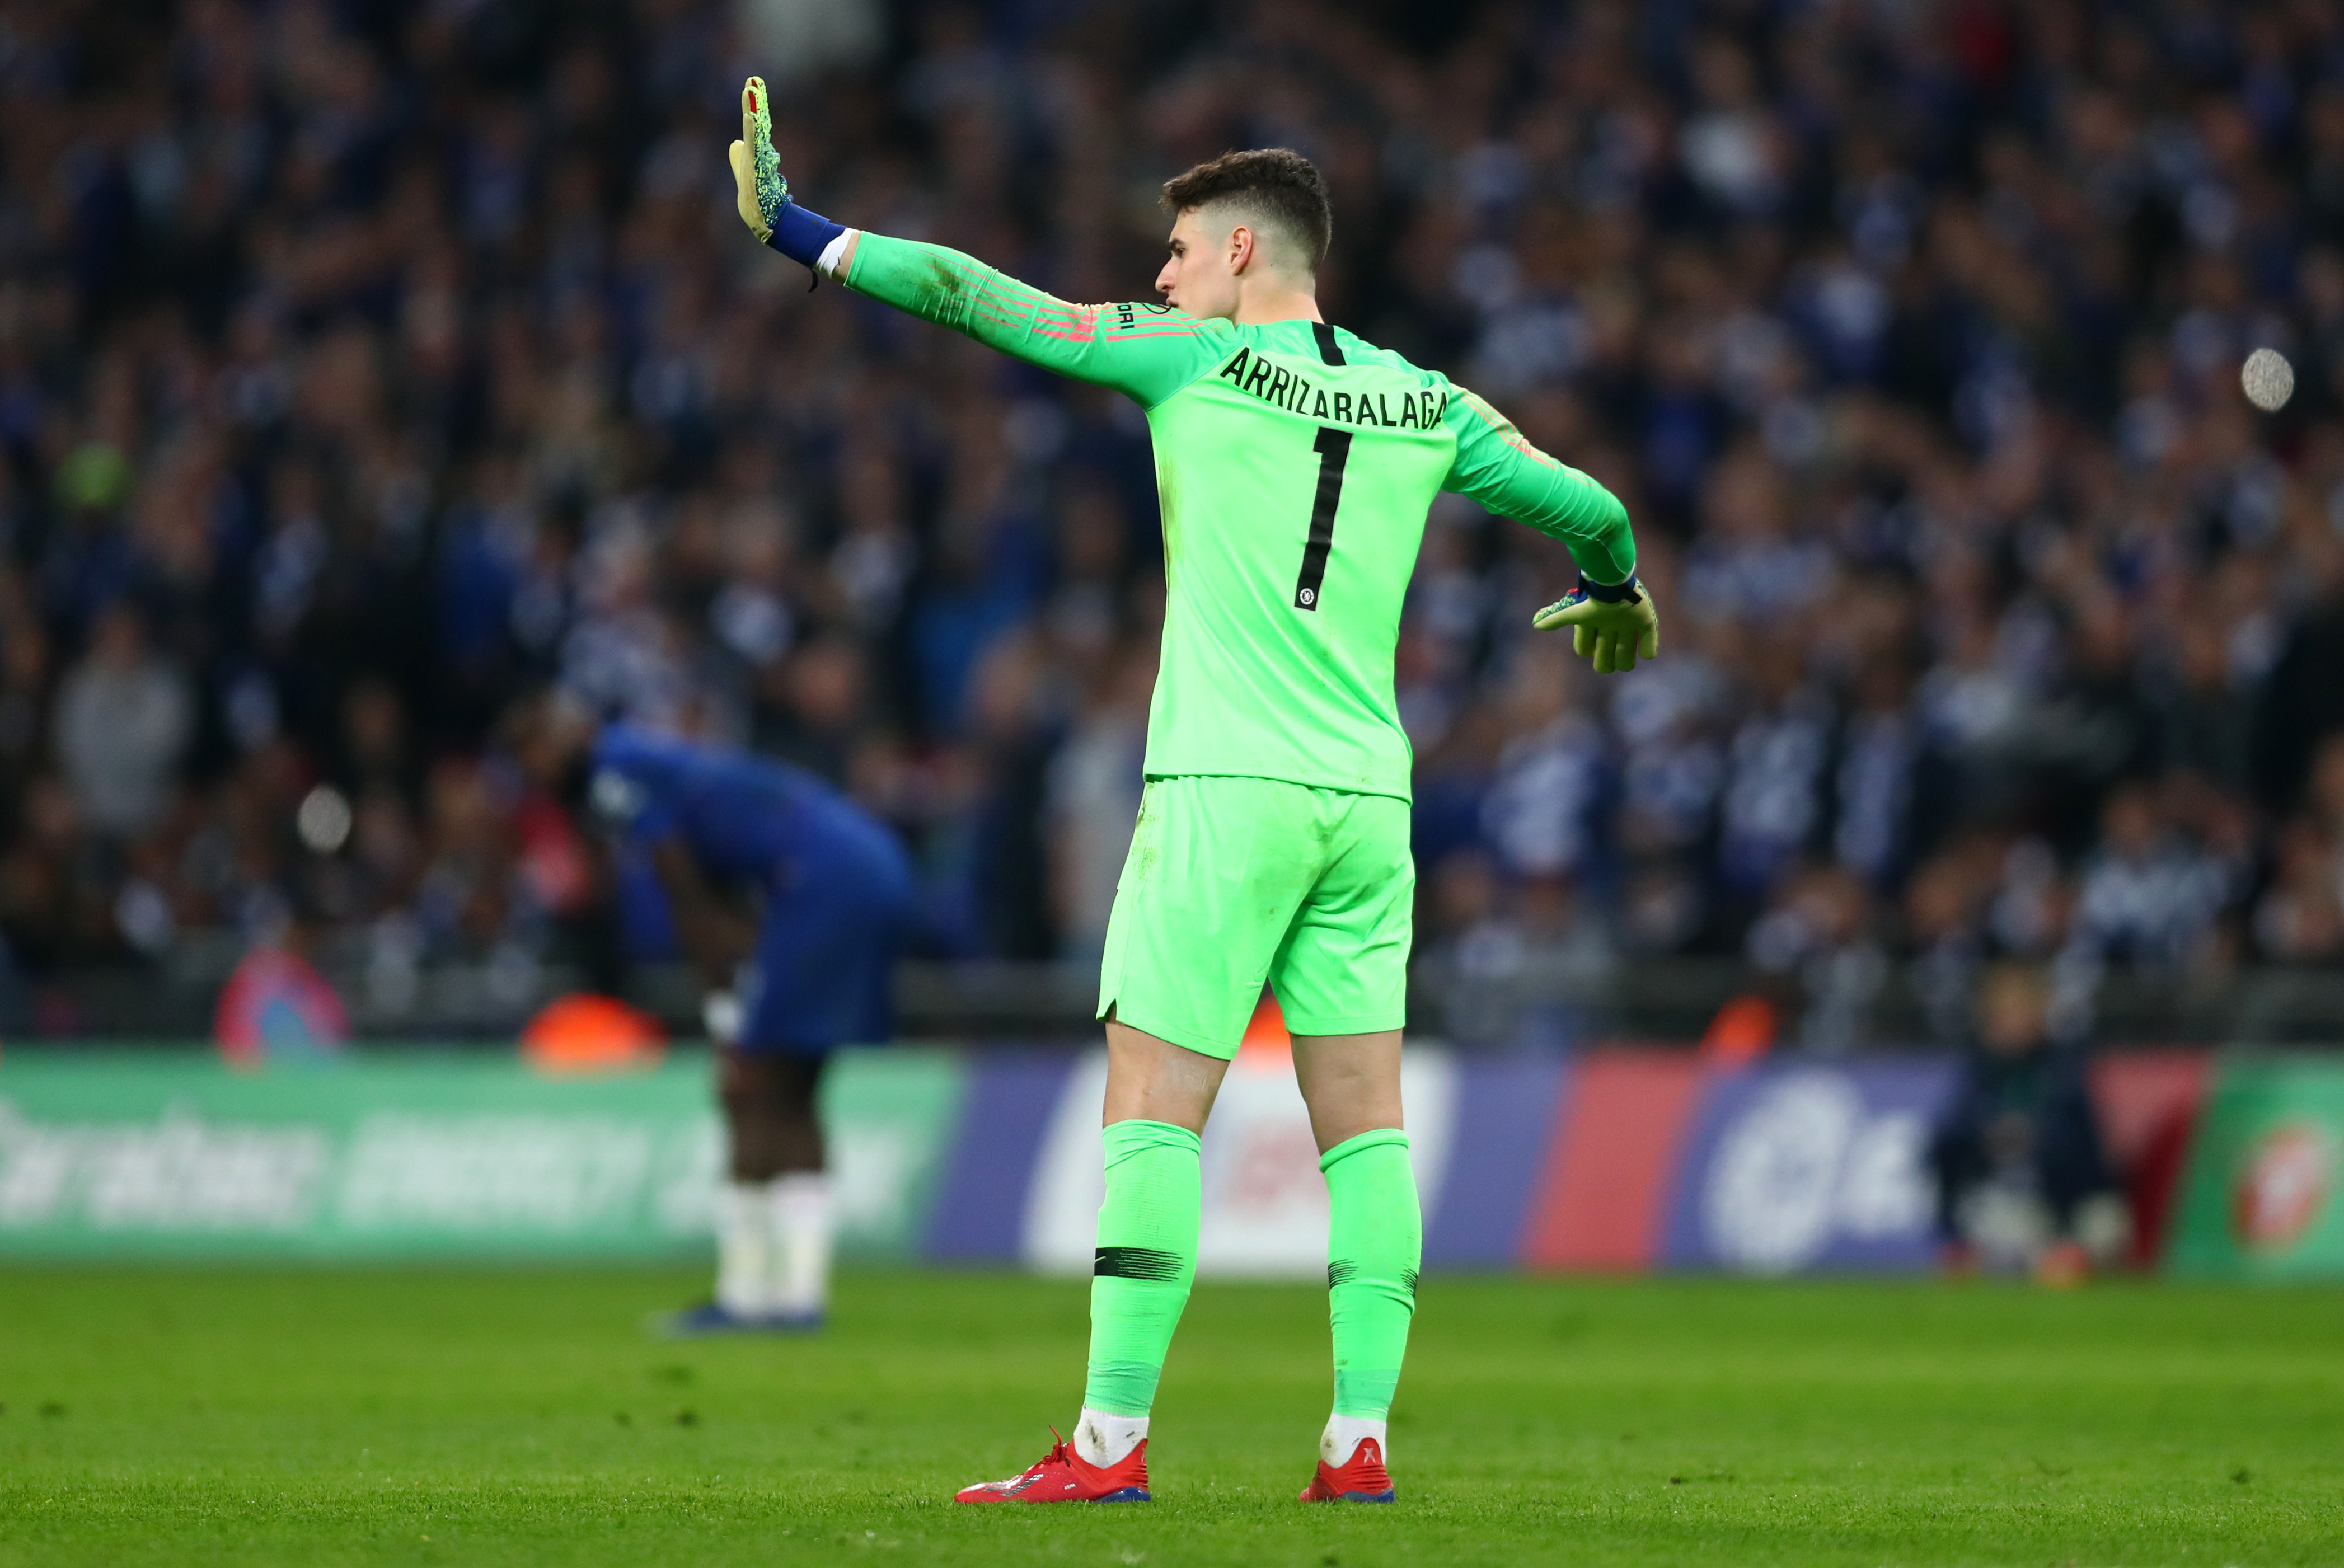 Was Kepa right or wrong to stay on the pitch?